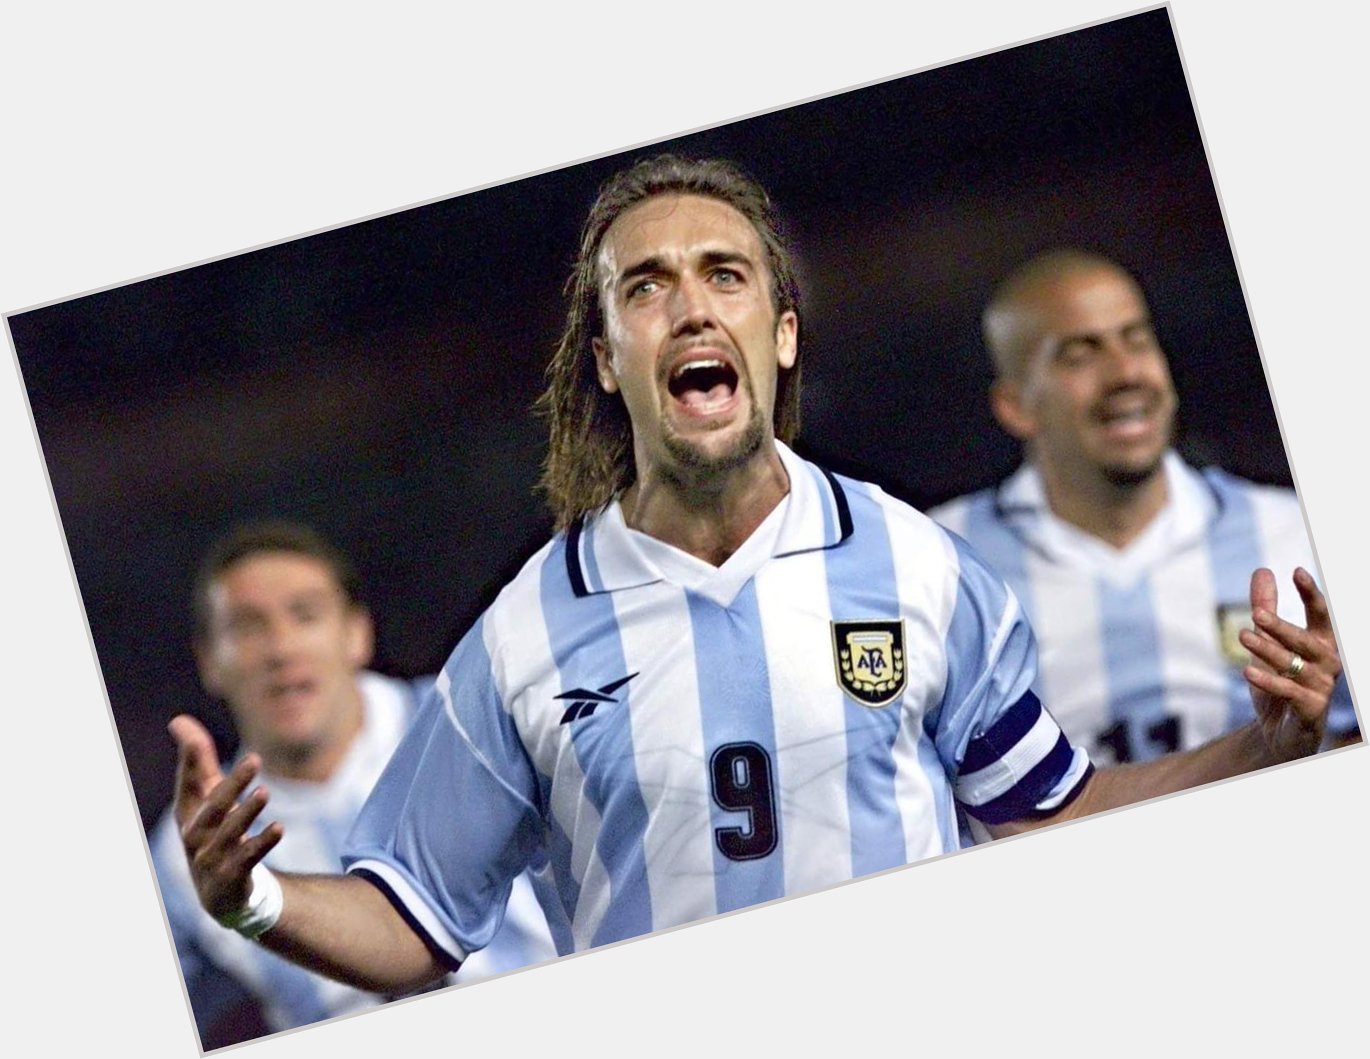 Happy 48th birthday to the great Gabriel Batistuta. One of the finest strikers of his era. 